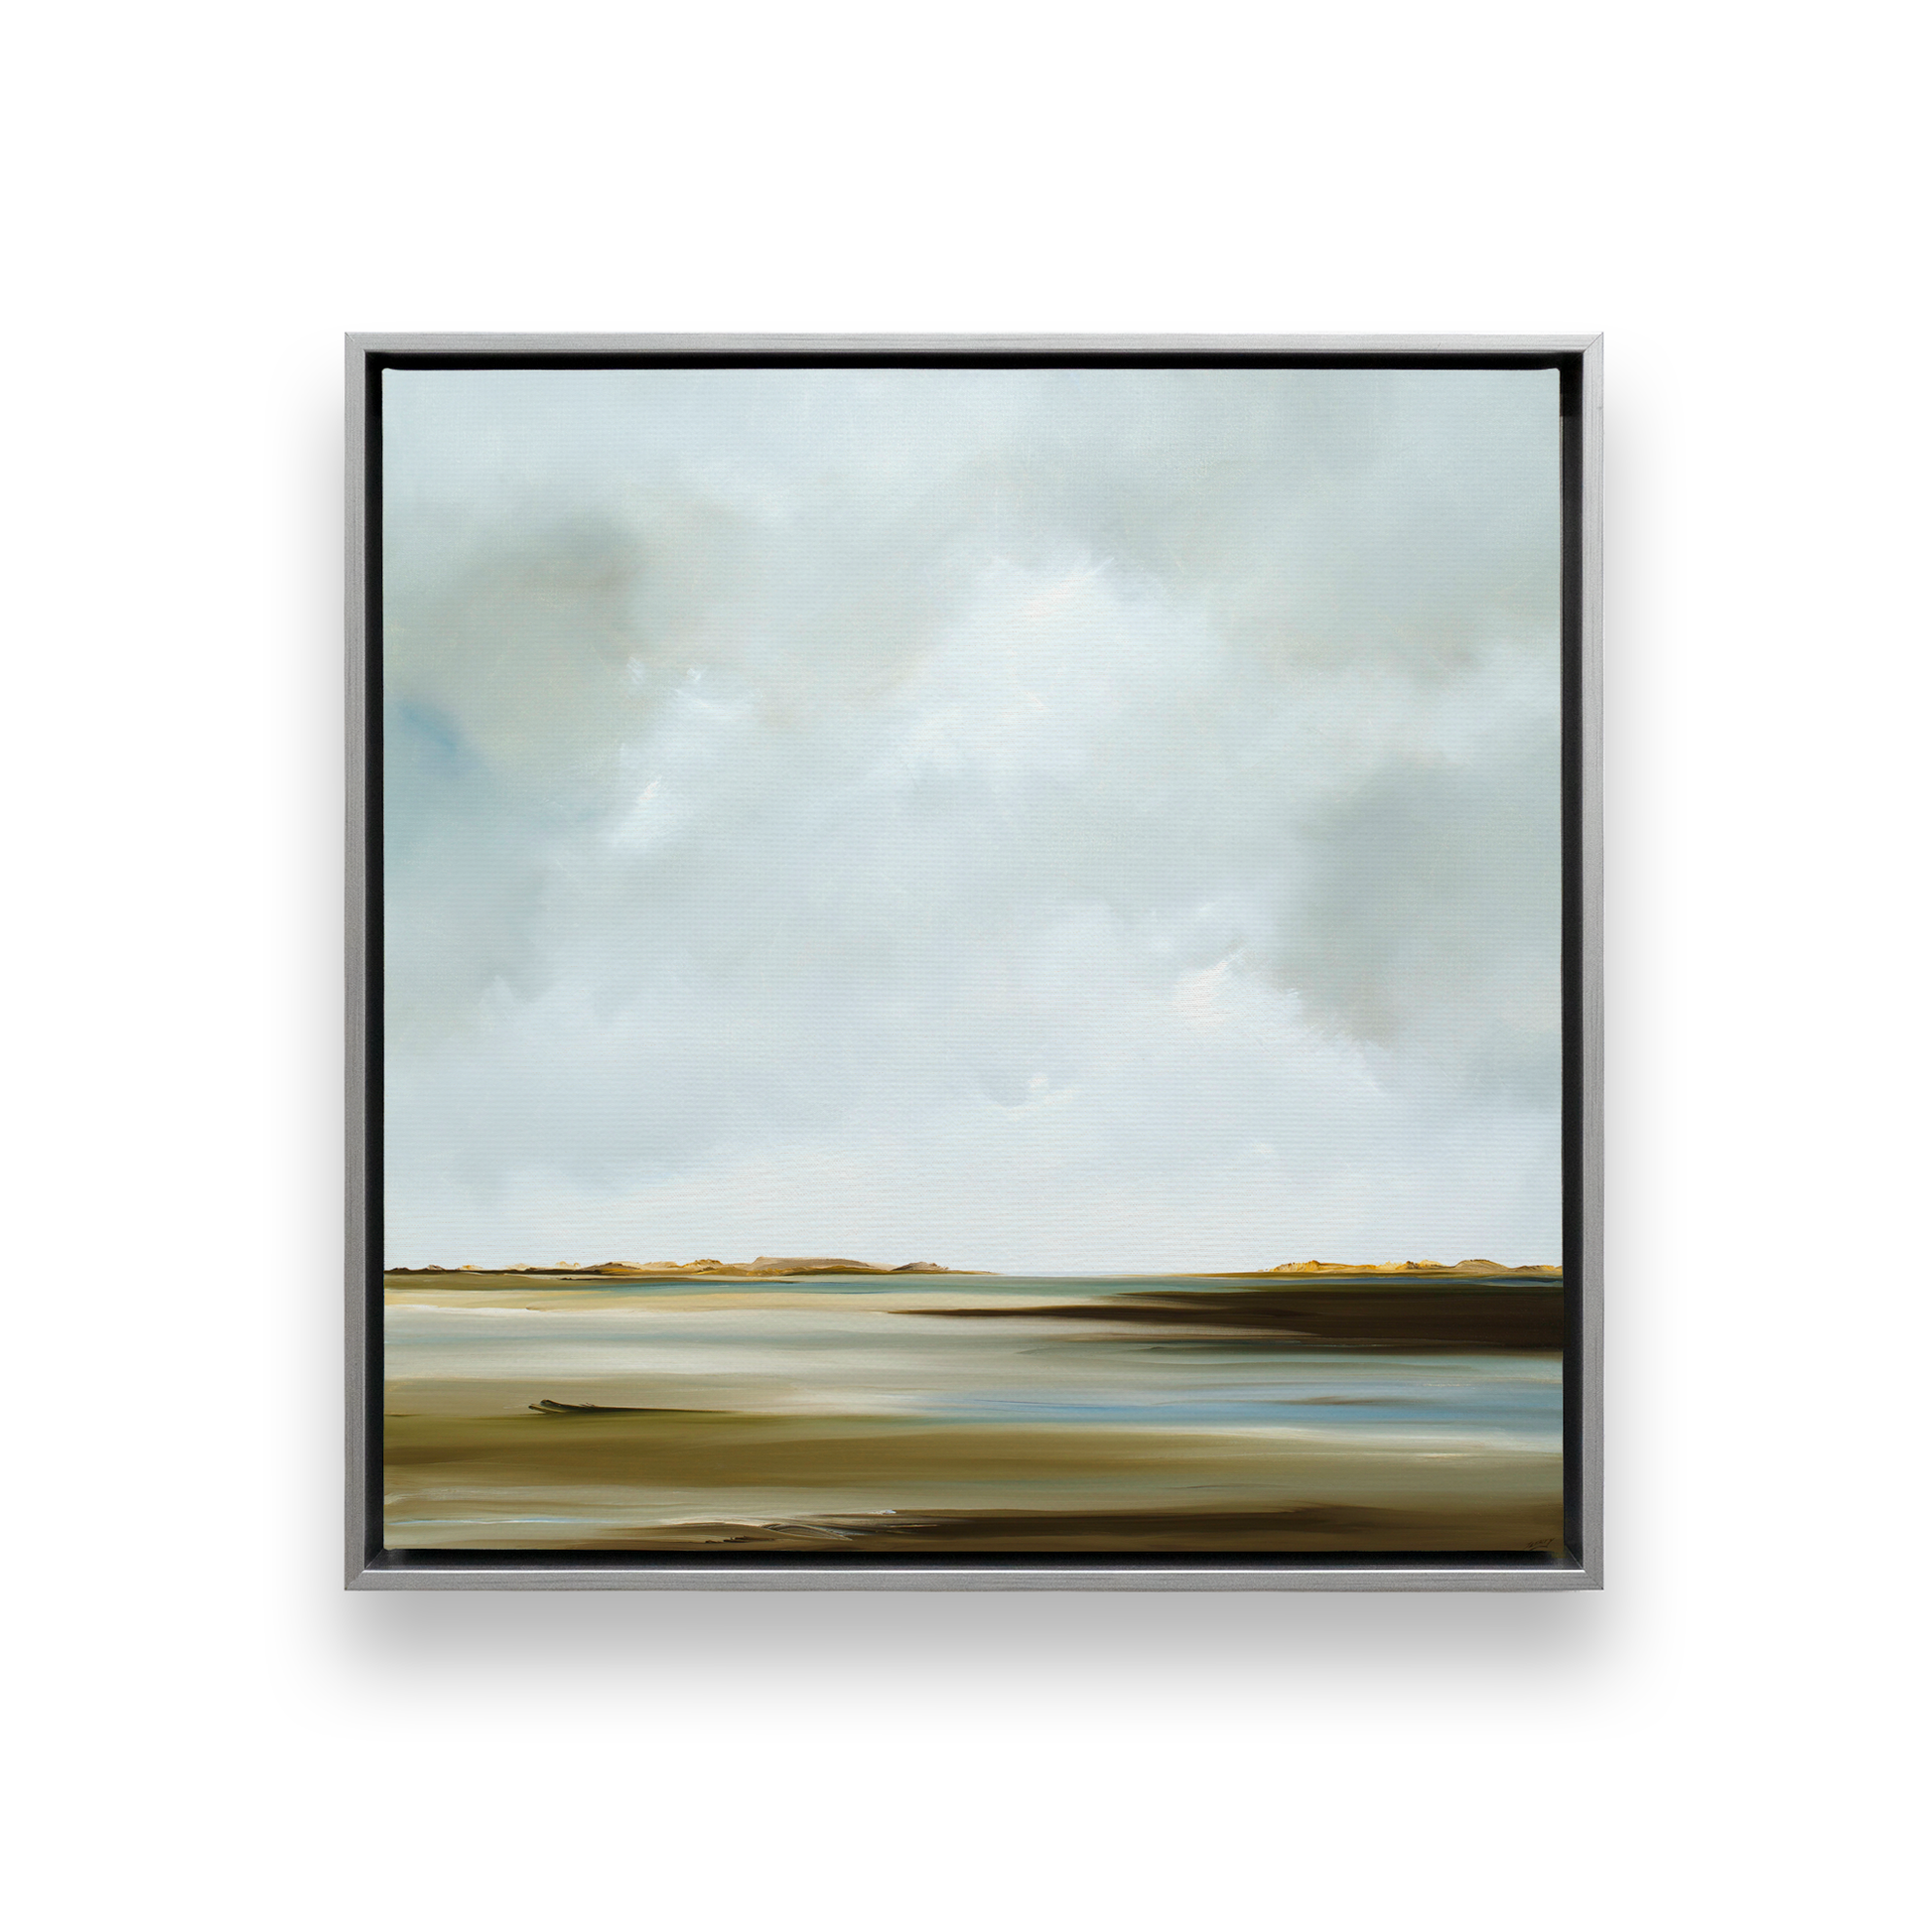 [color:Polished Chrome],[shape:square], Picture of art in a black frame